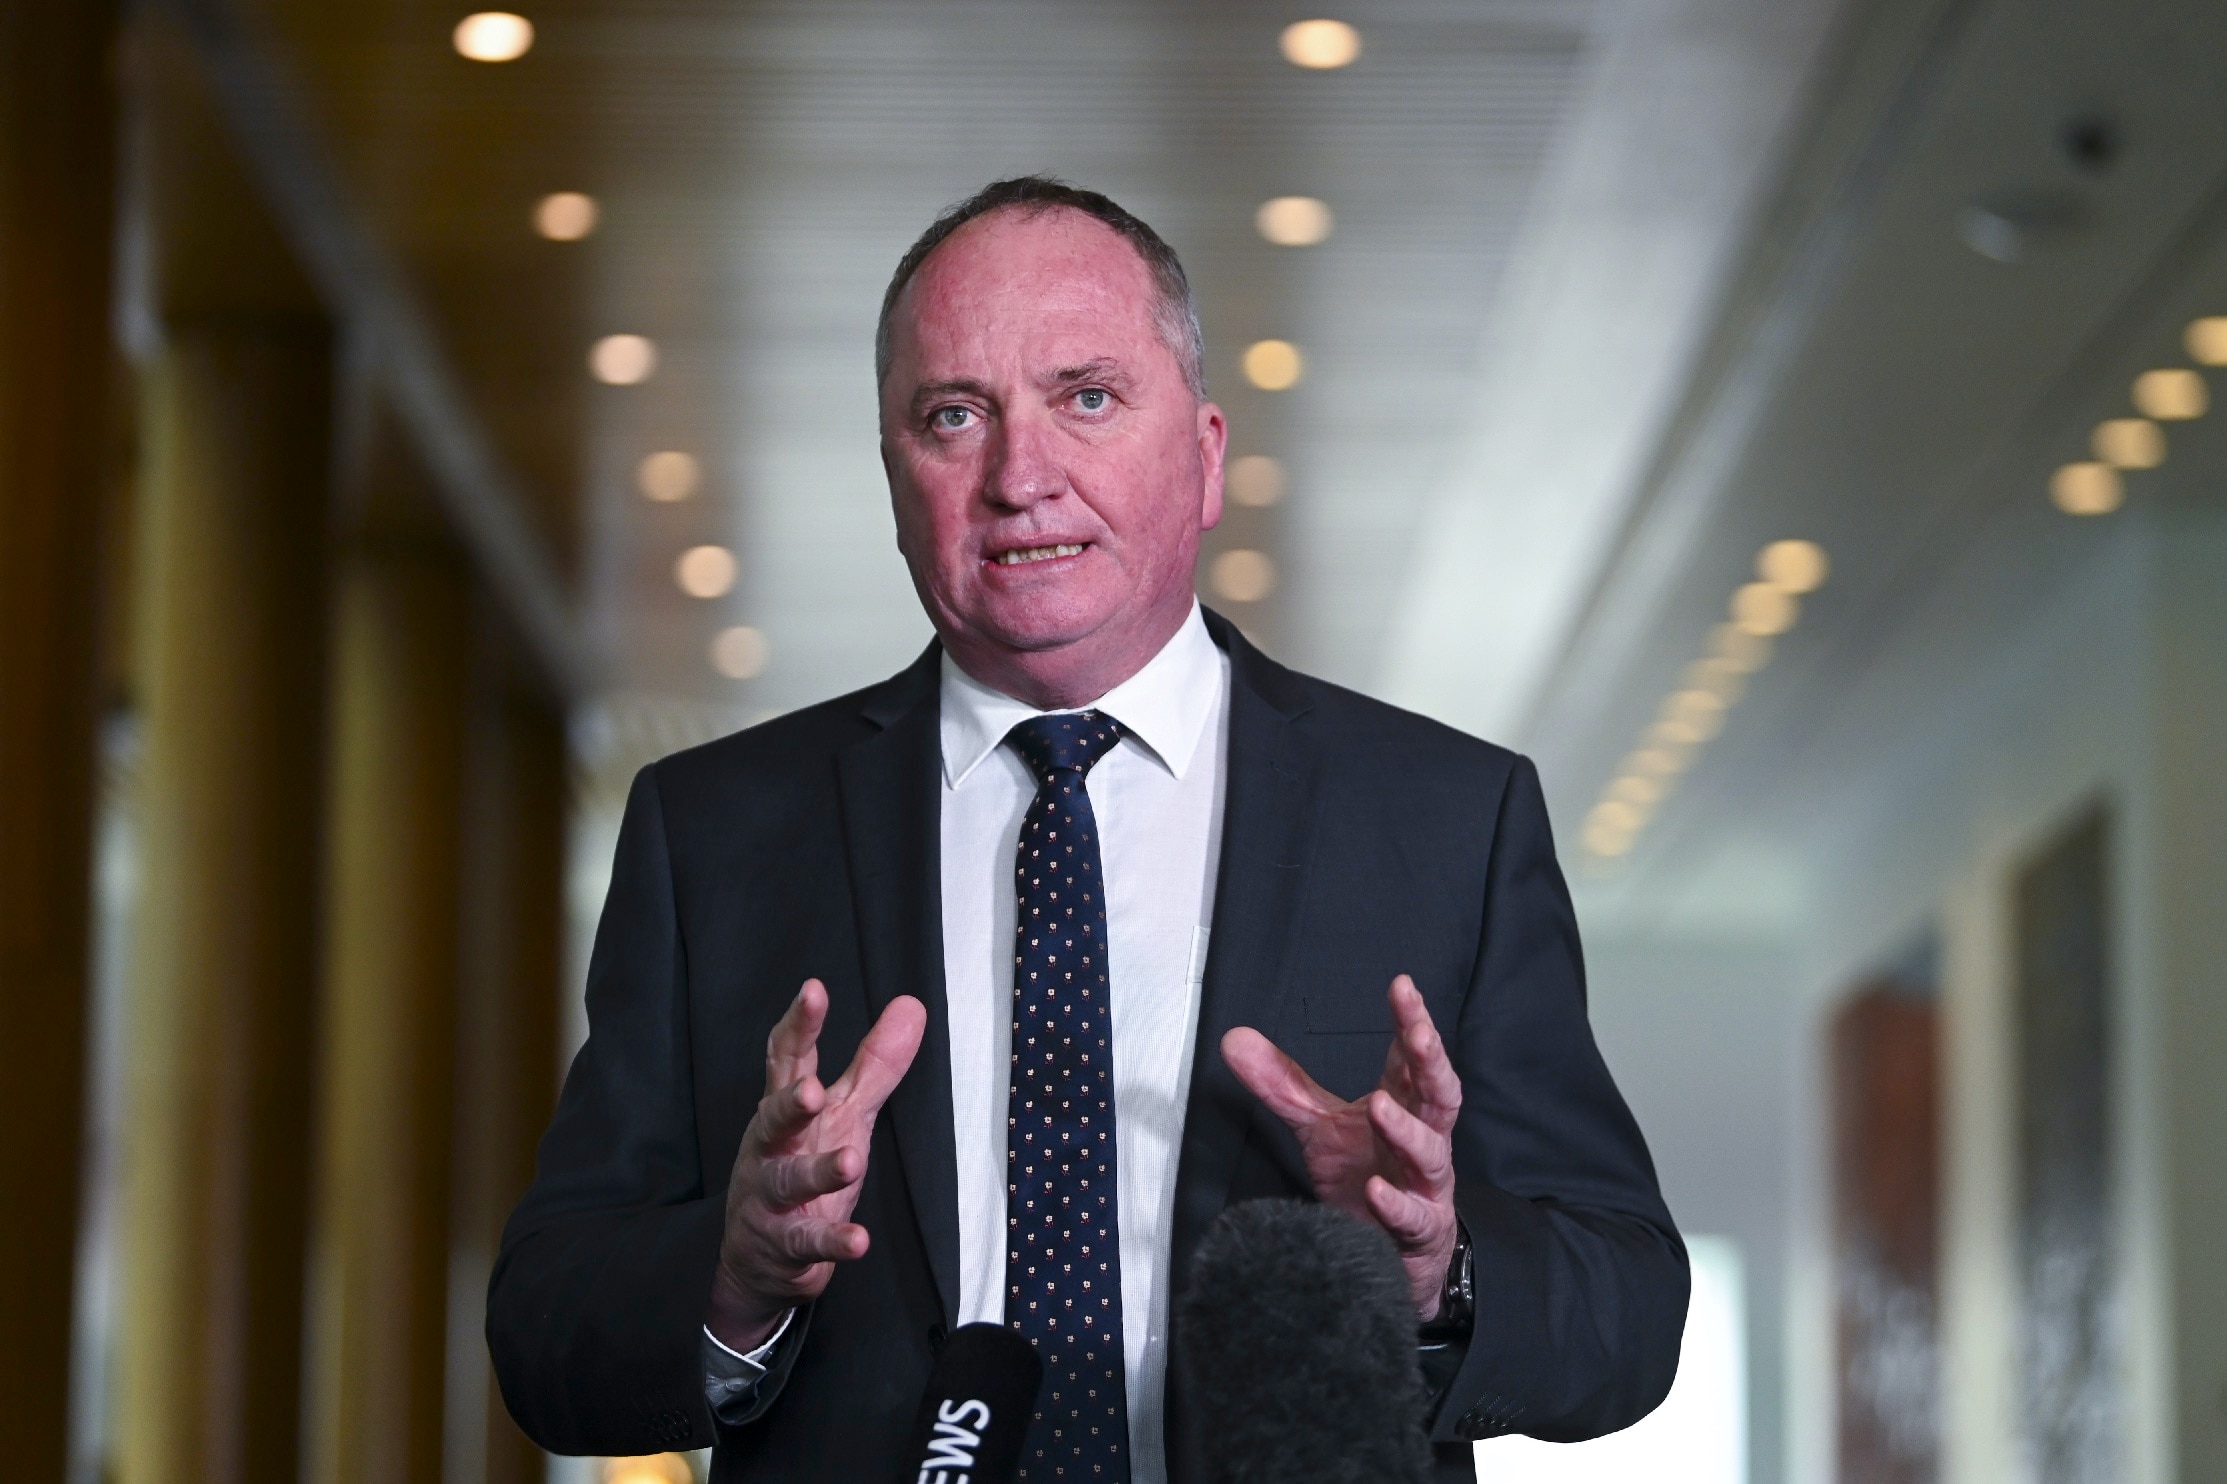 Nationals leader Barnaby Joyce speaking ahead of Sunday's party room meeting says there is little chance of support for a steep increase to the 2030 target.